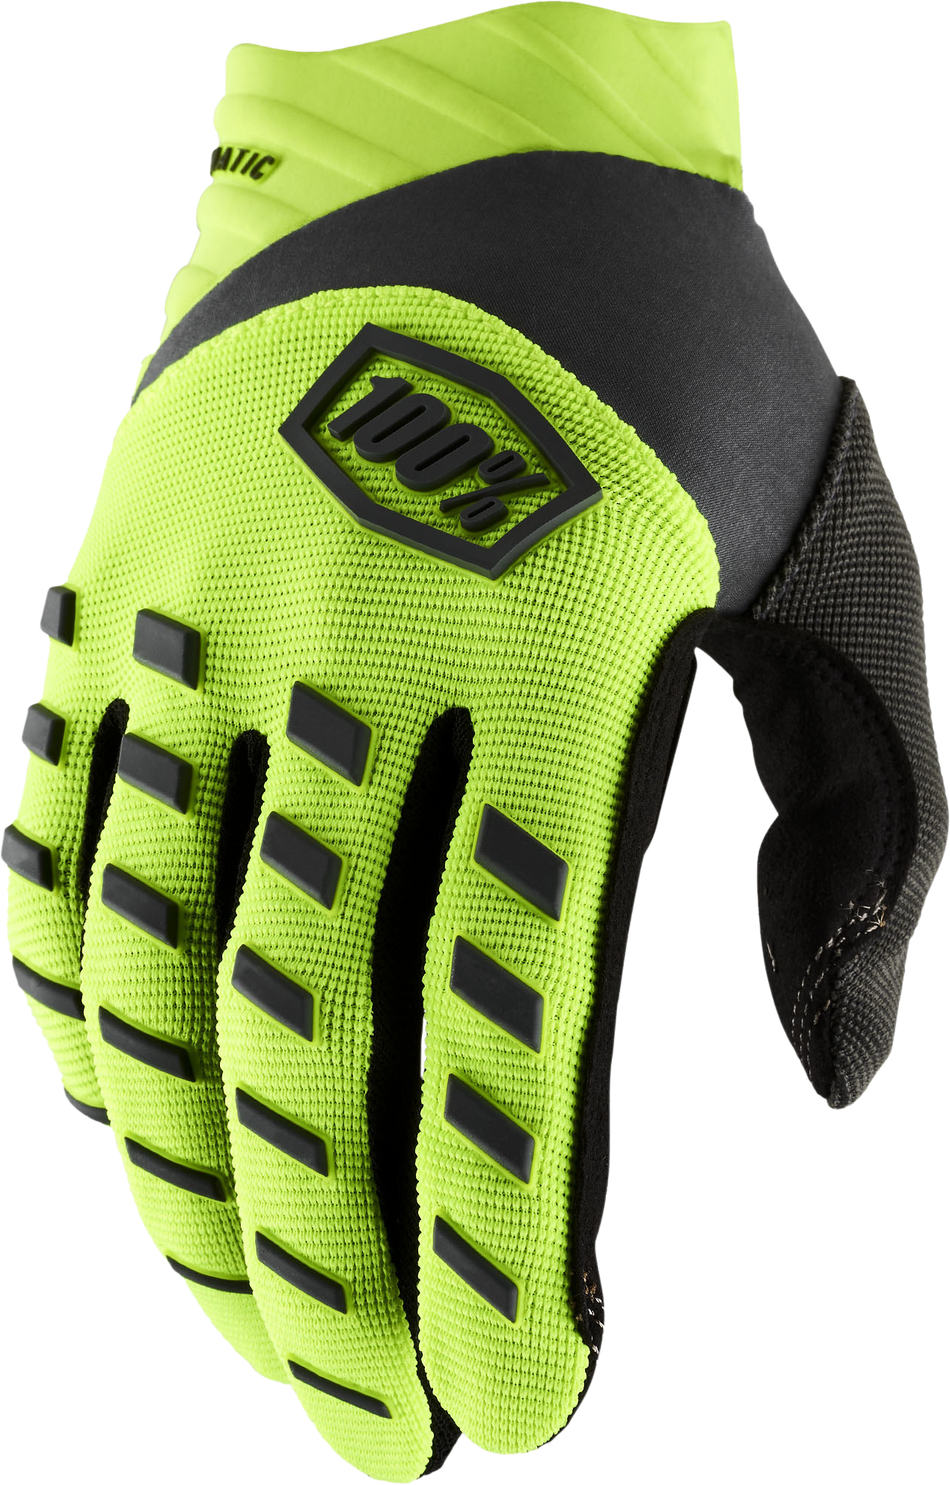 100% Airmatic Gloves Fluo Yellow/Black Sm 10000-00010